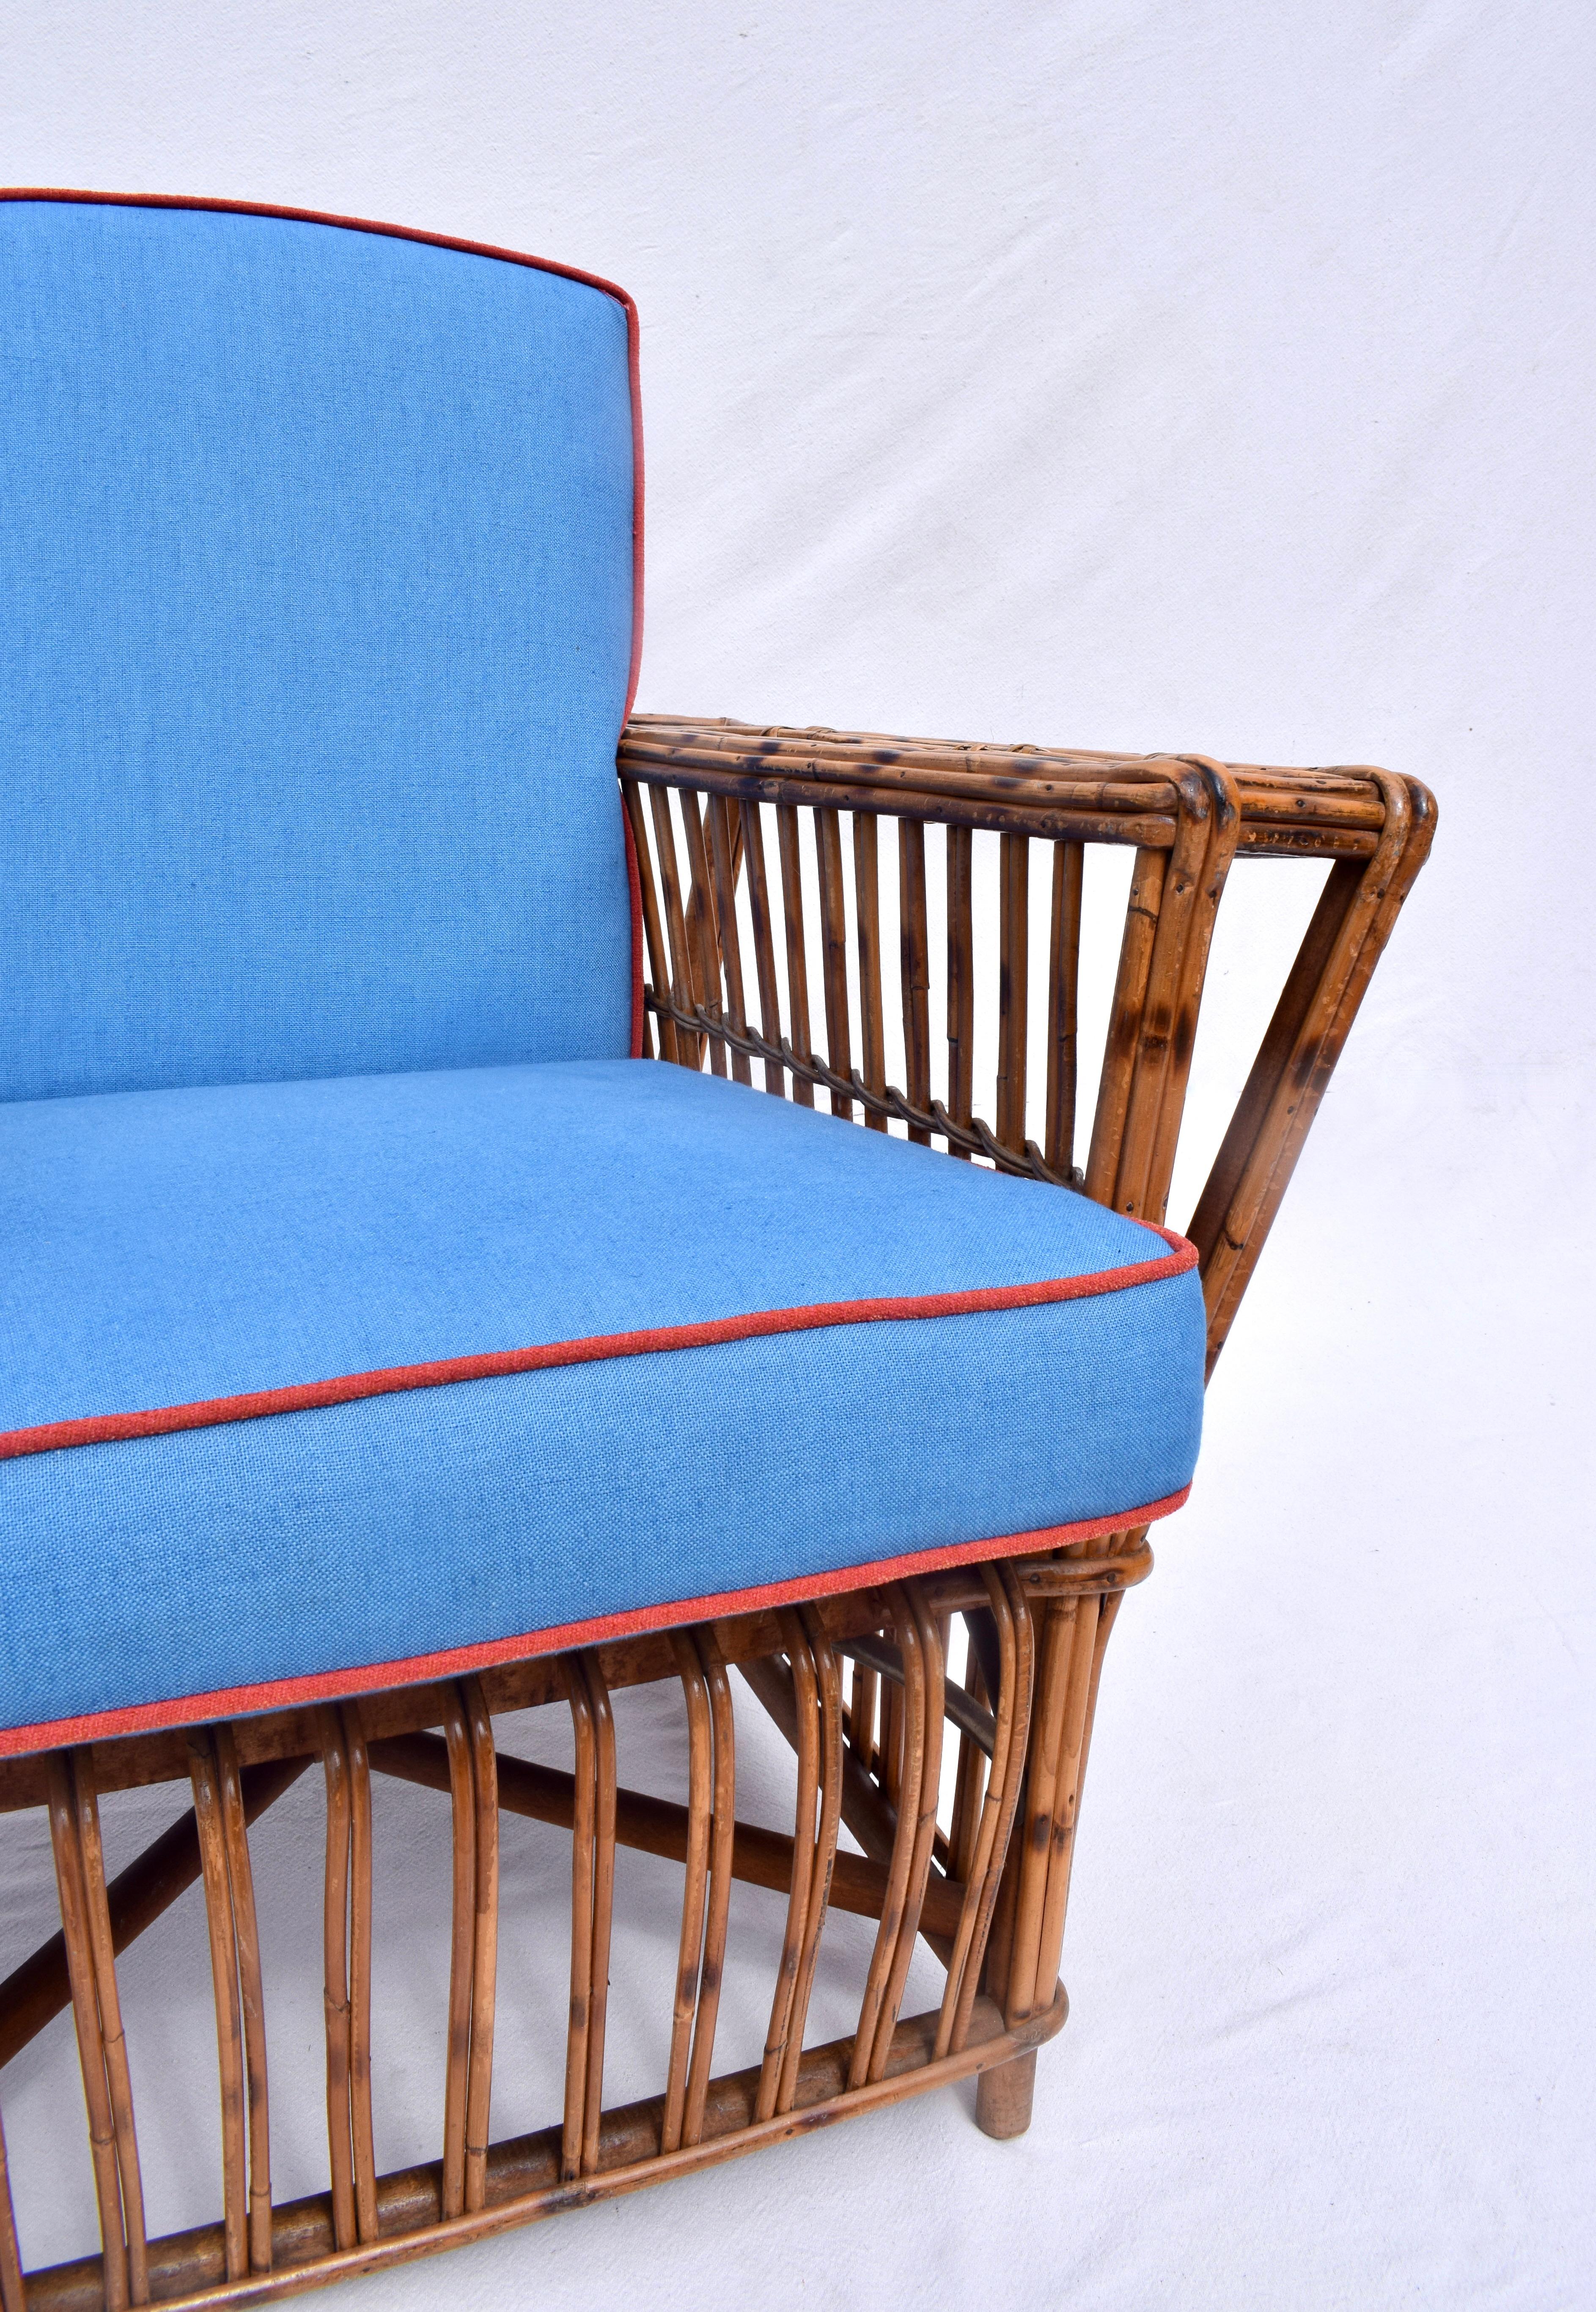 Stick Wicker Rattan Reed Presidents Chairs For Sale 6